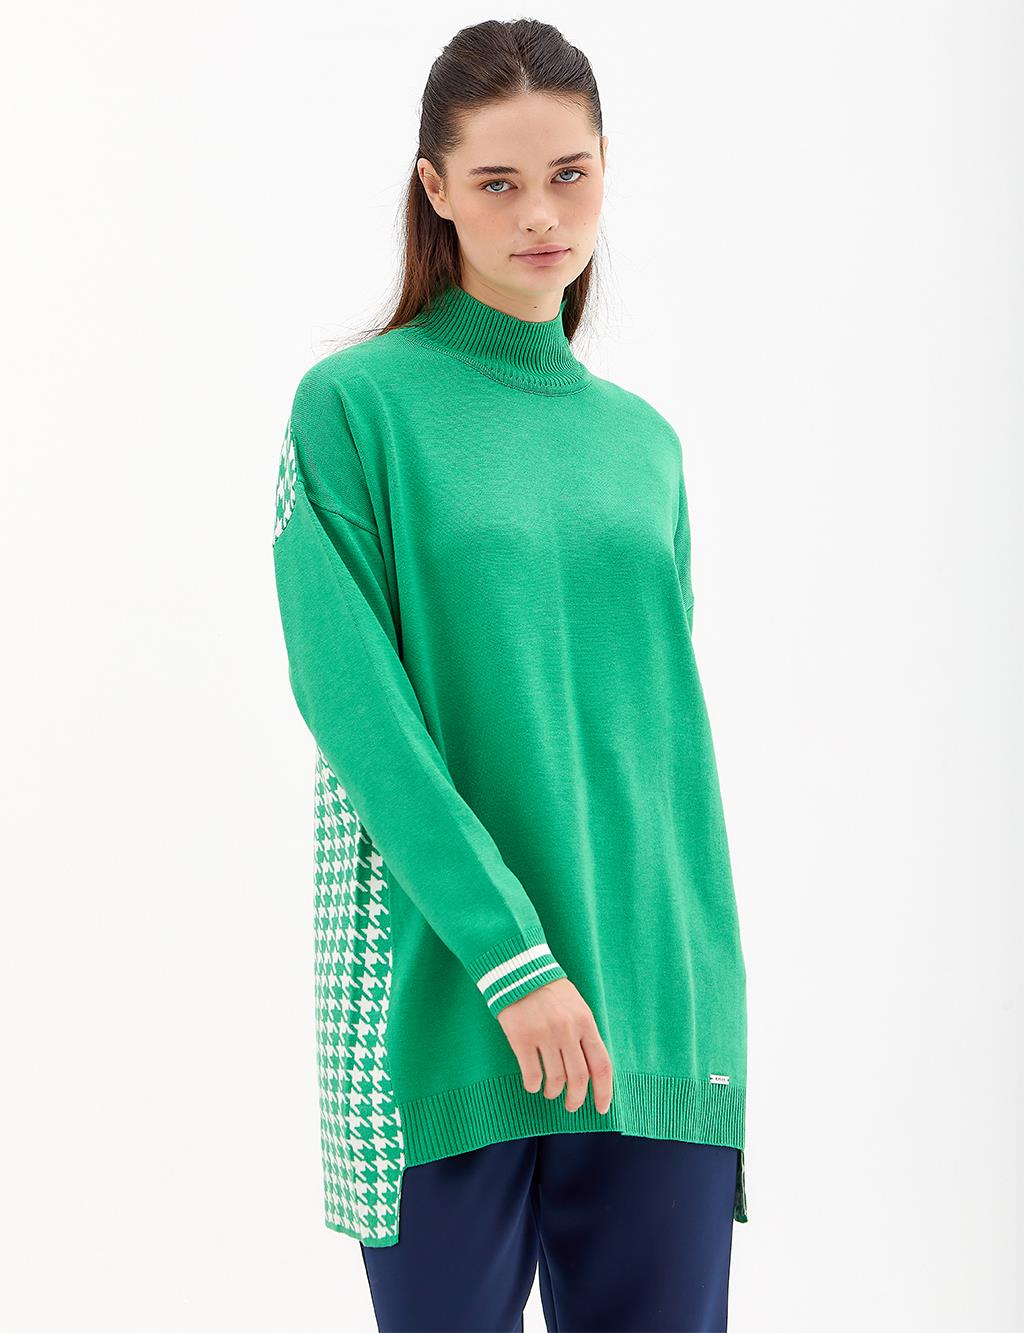 Houndstooth Patterned Knitwear Tunic Green